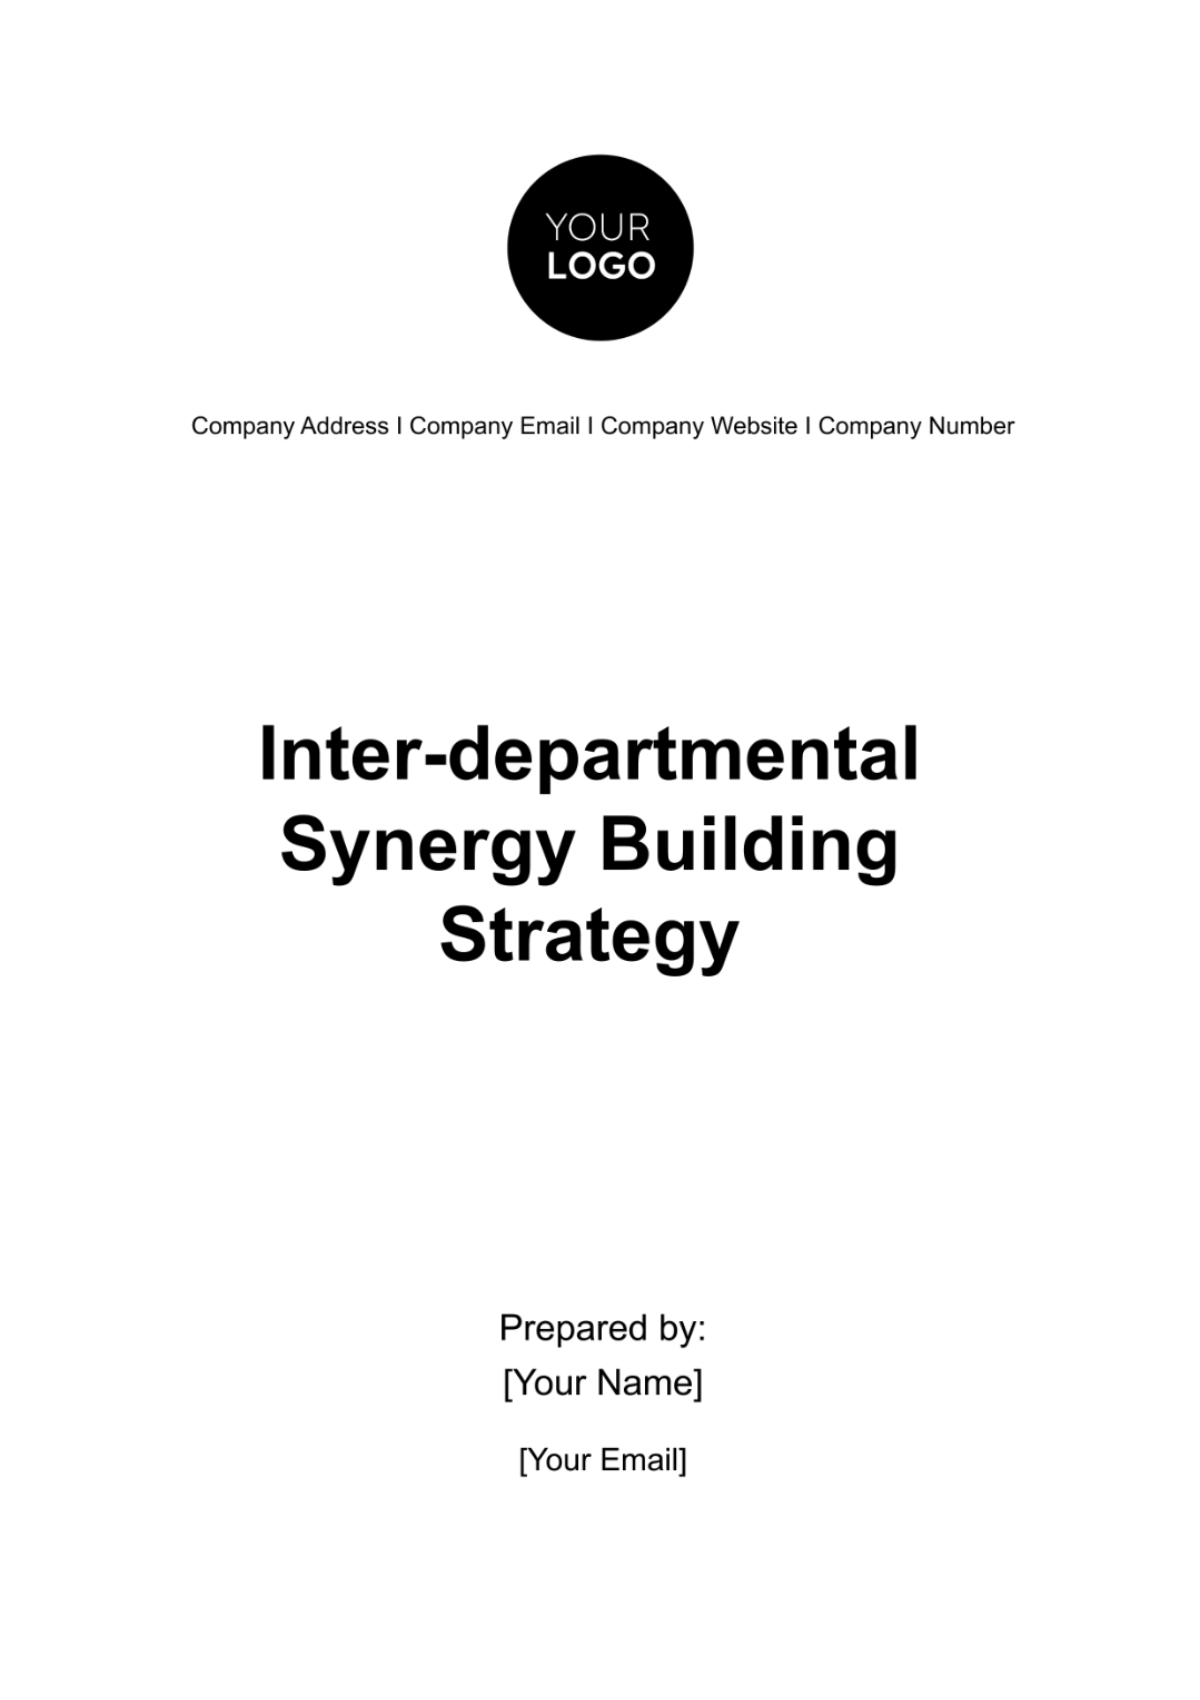 Free Inter-departmental Synergy Building Strategy HR Template